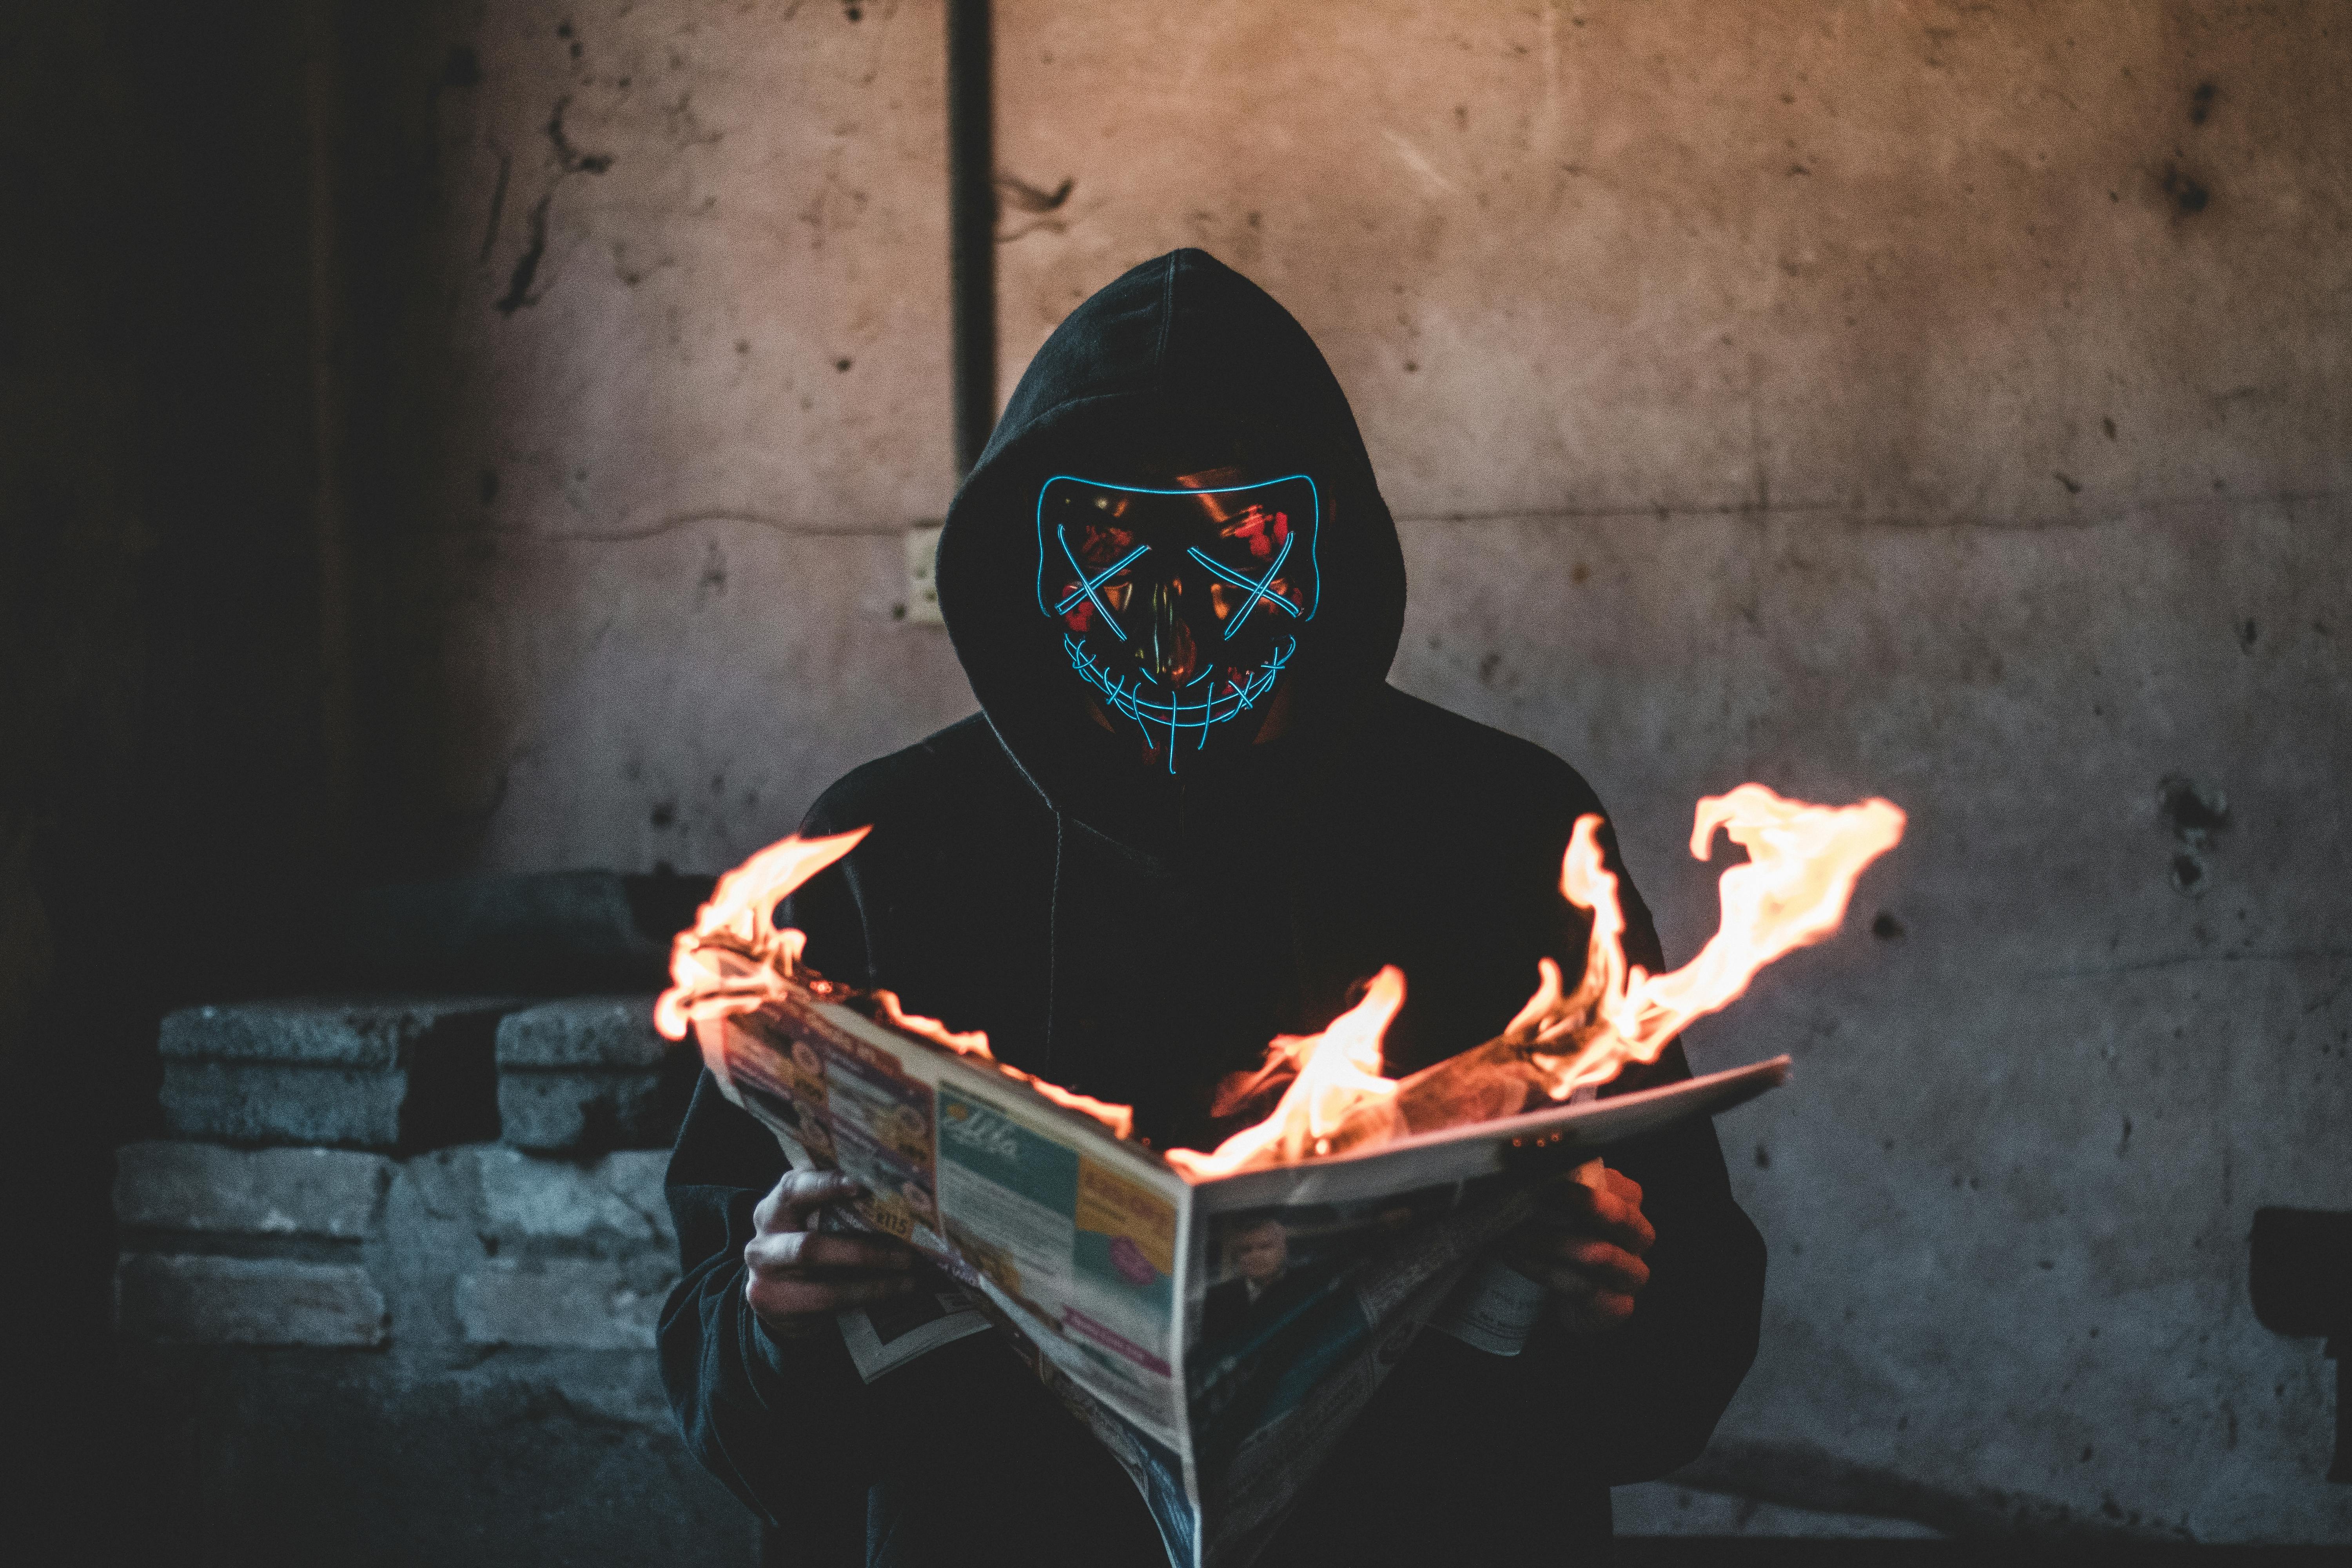 hård Morgen knude Person with Black Mask holding a Burning News Paper · Free Stock Photo